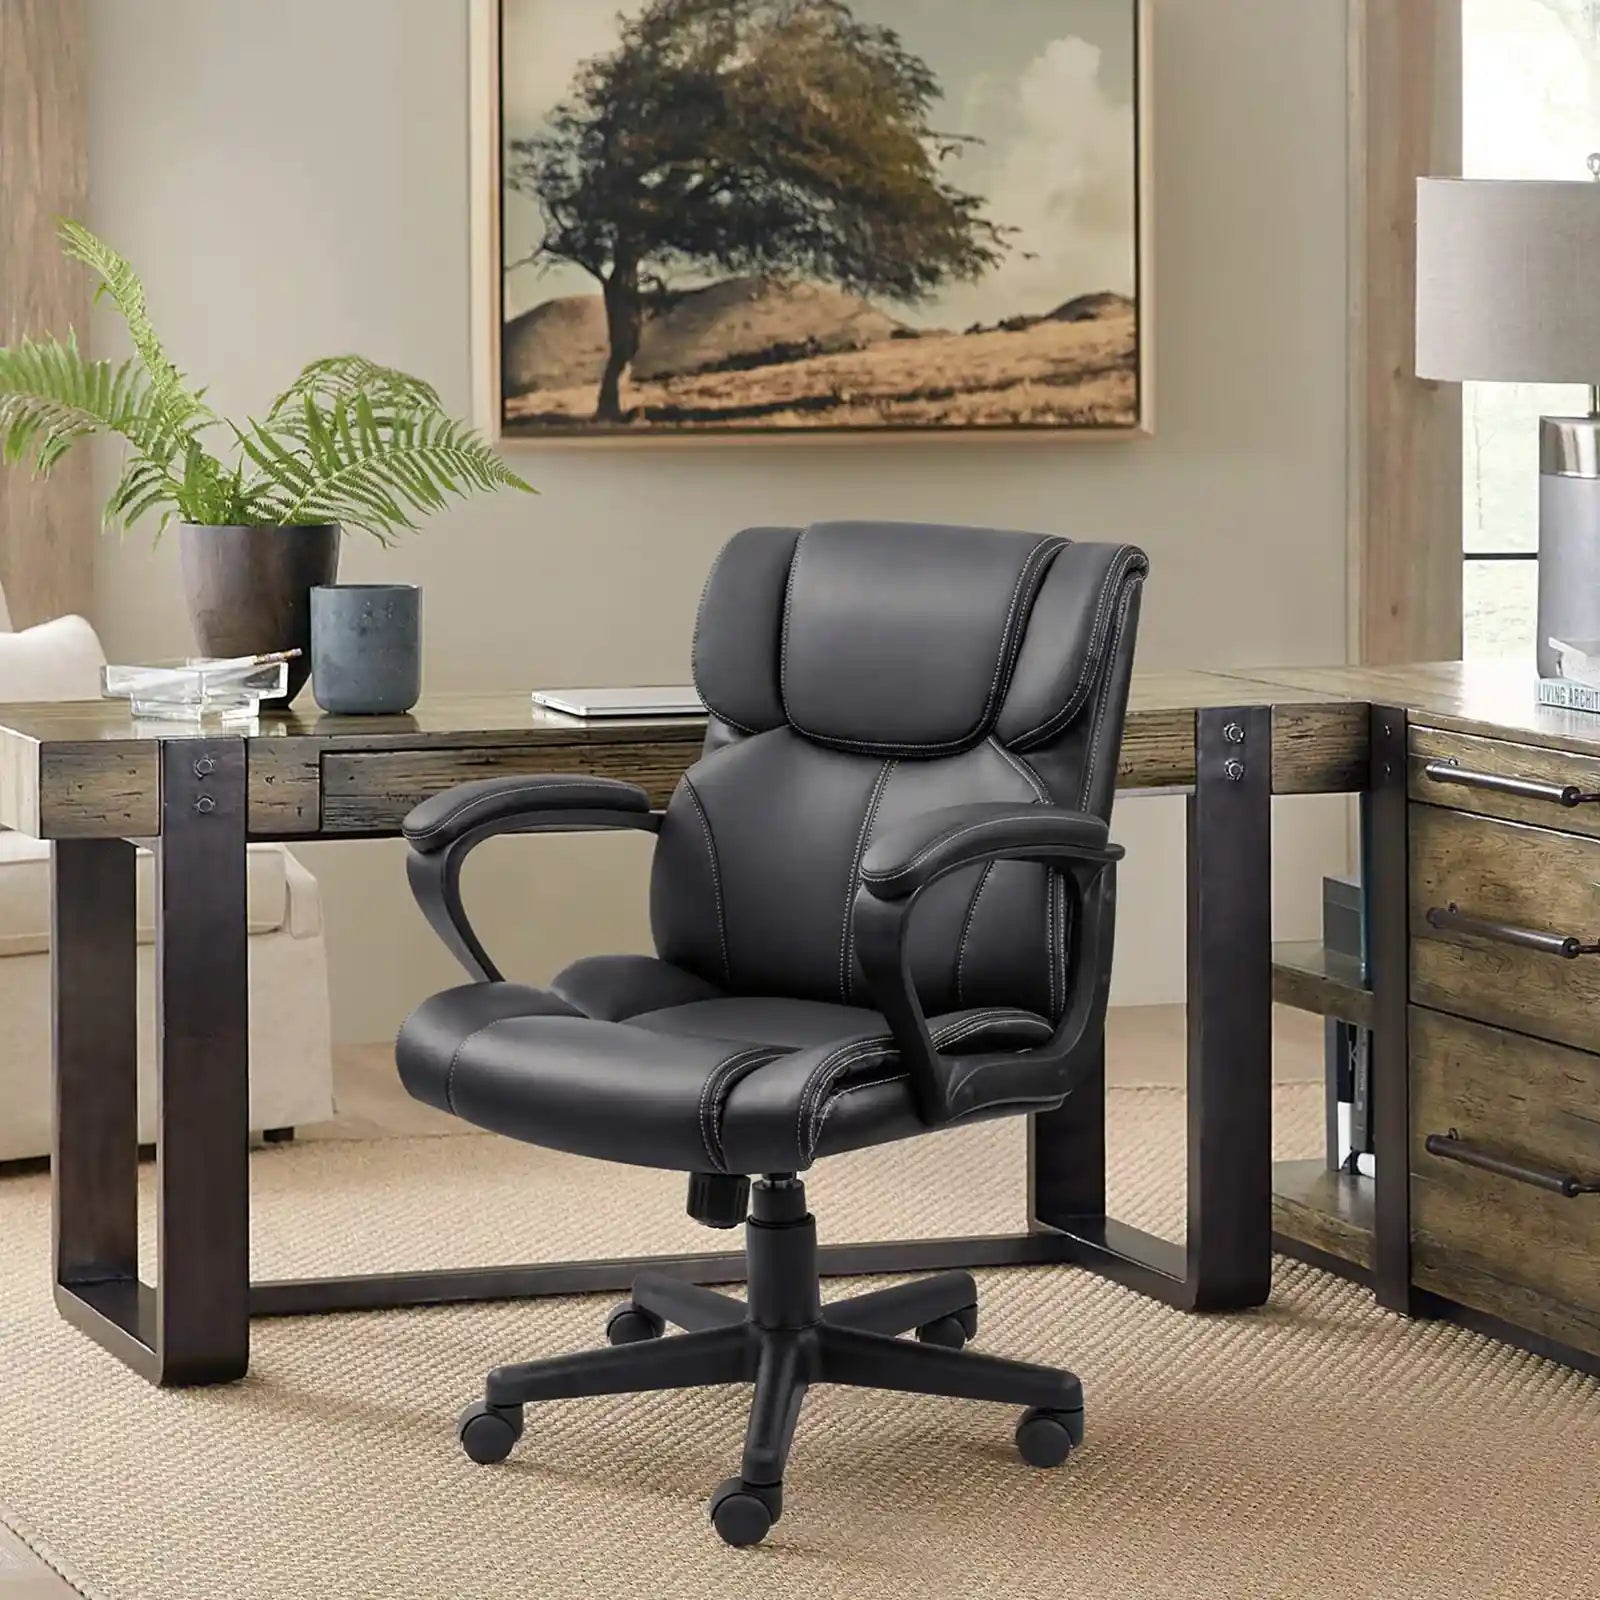 Mid-Back Faux Leather Ergonomic Executive Office Desk Chair